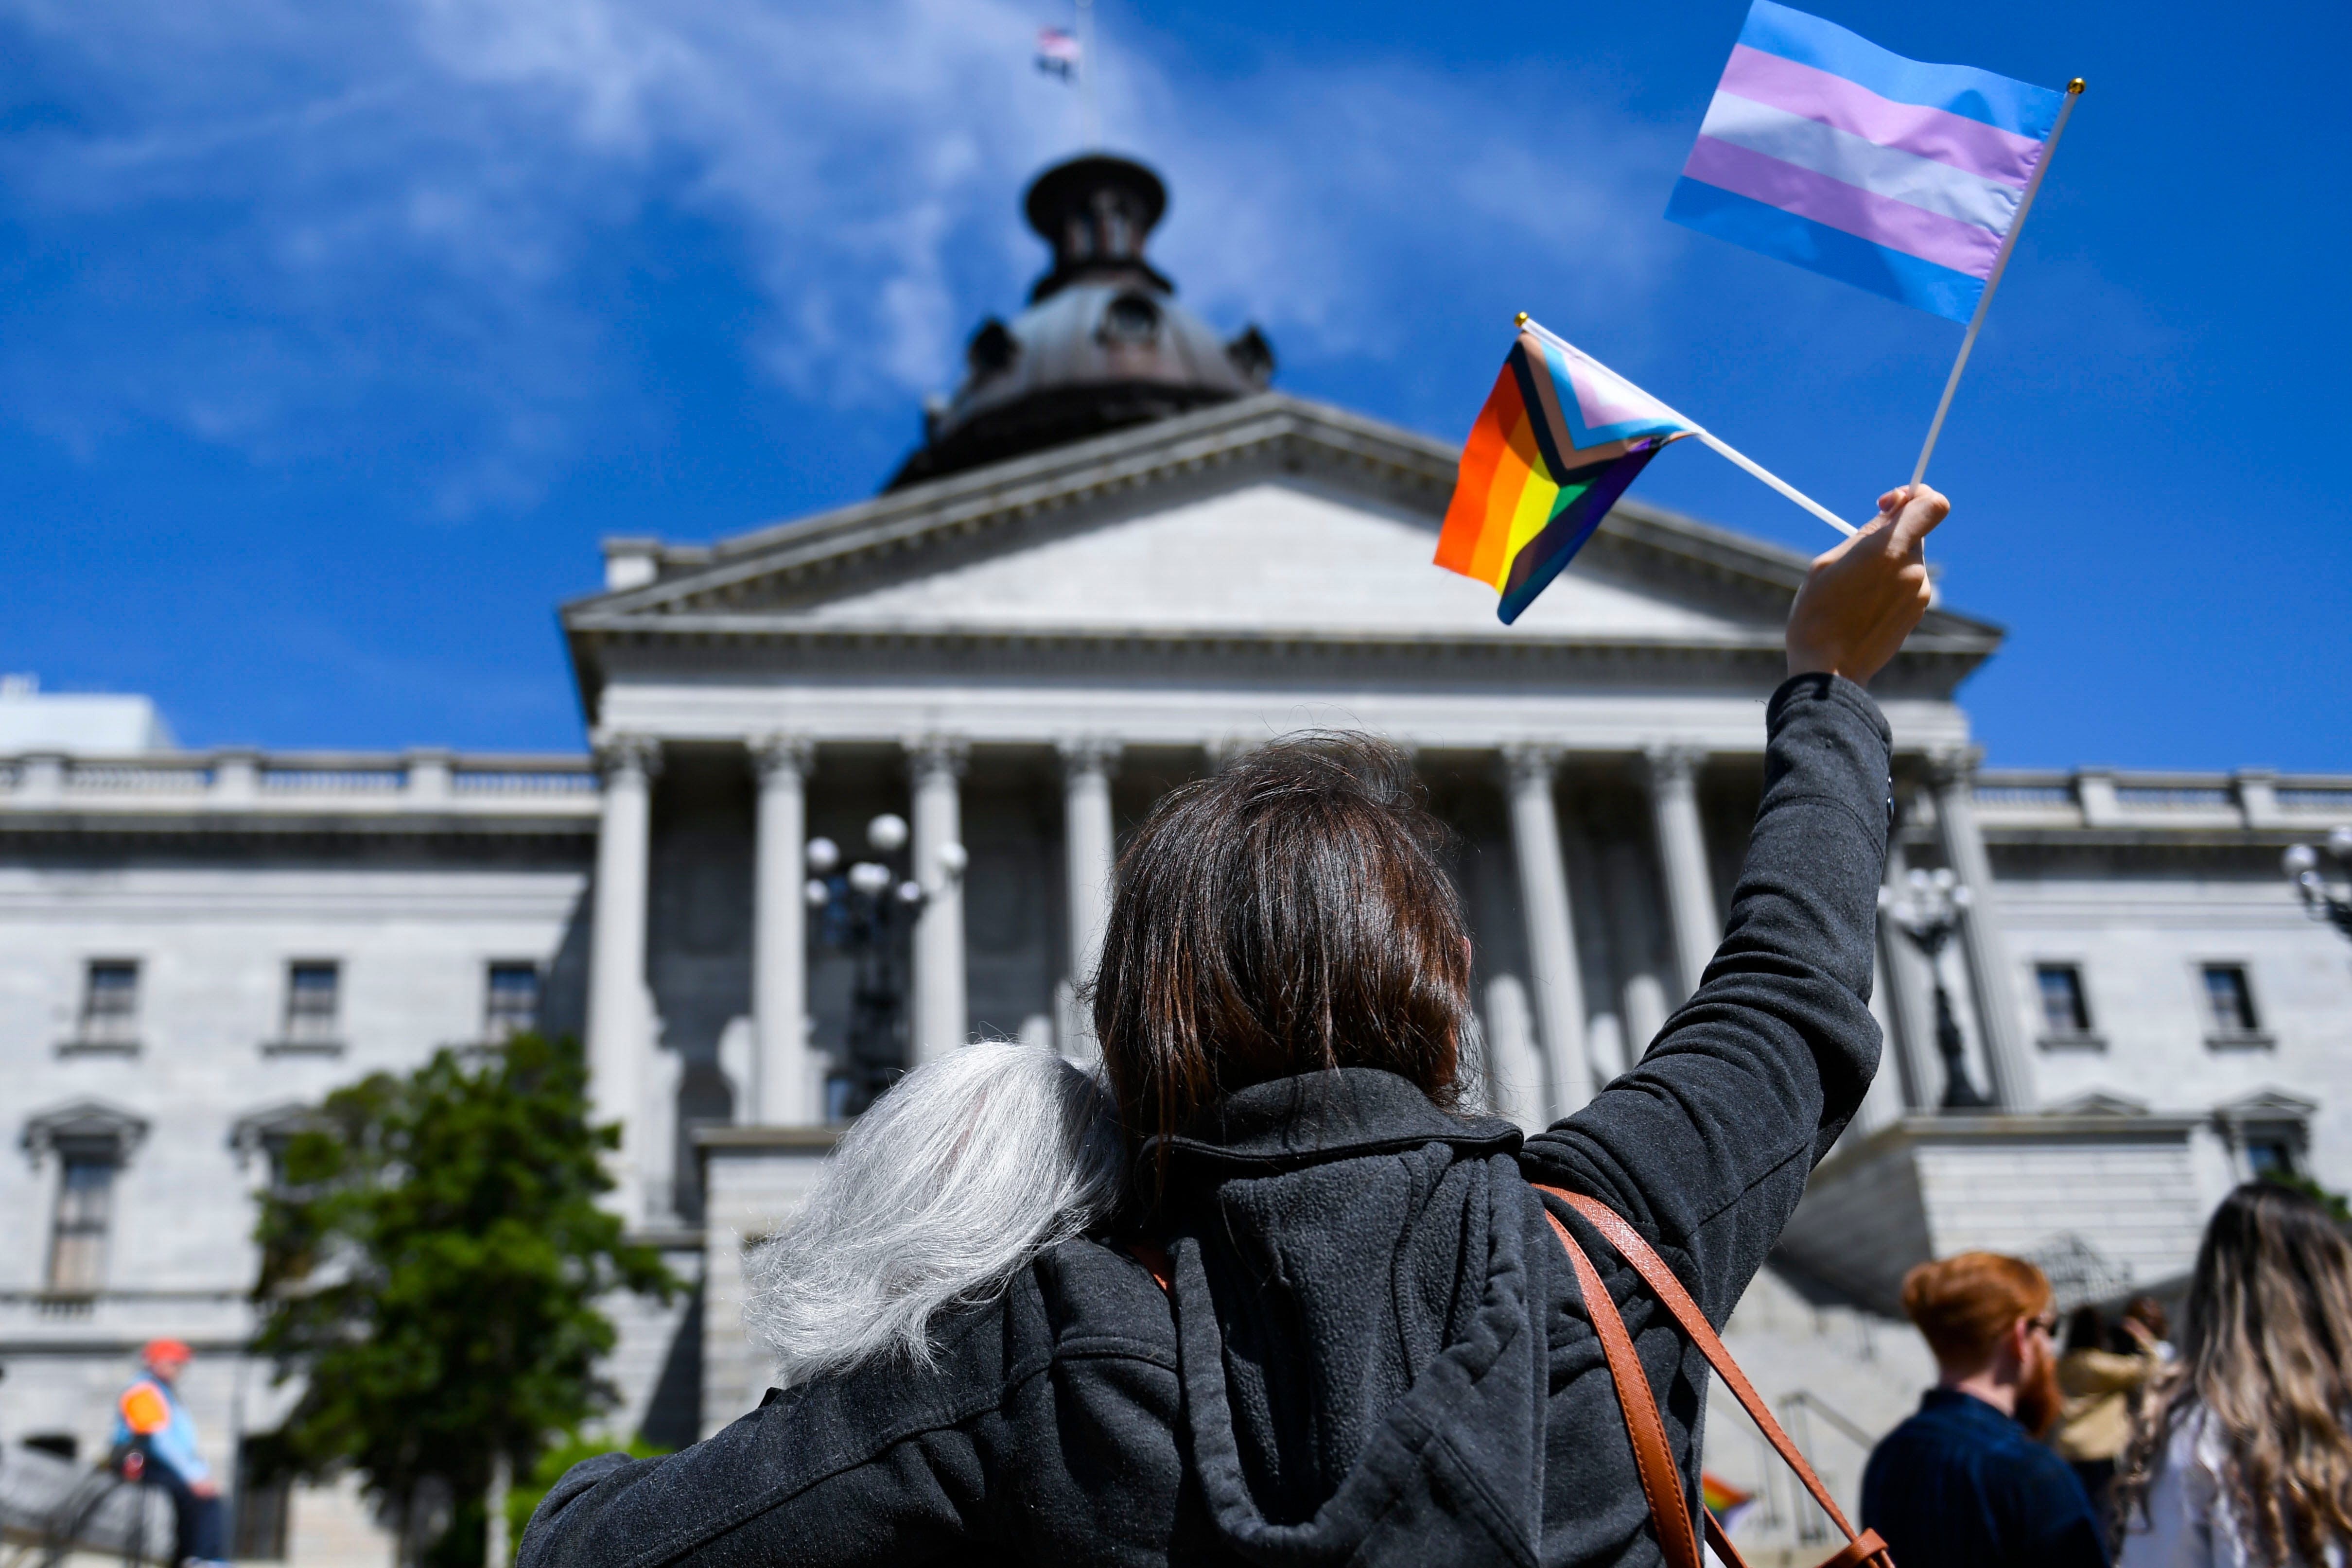 SC Senate to debate bill about banning transgender youth medical care, what to know